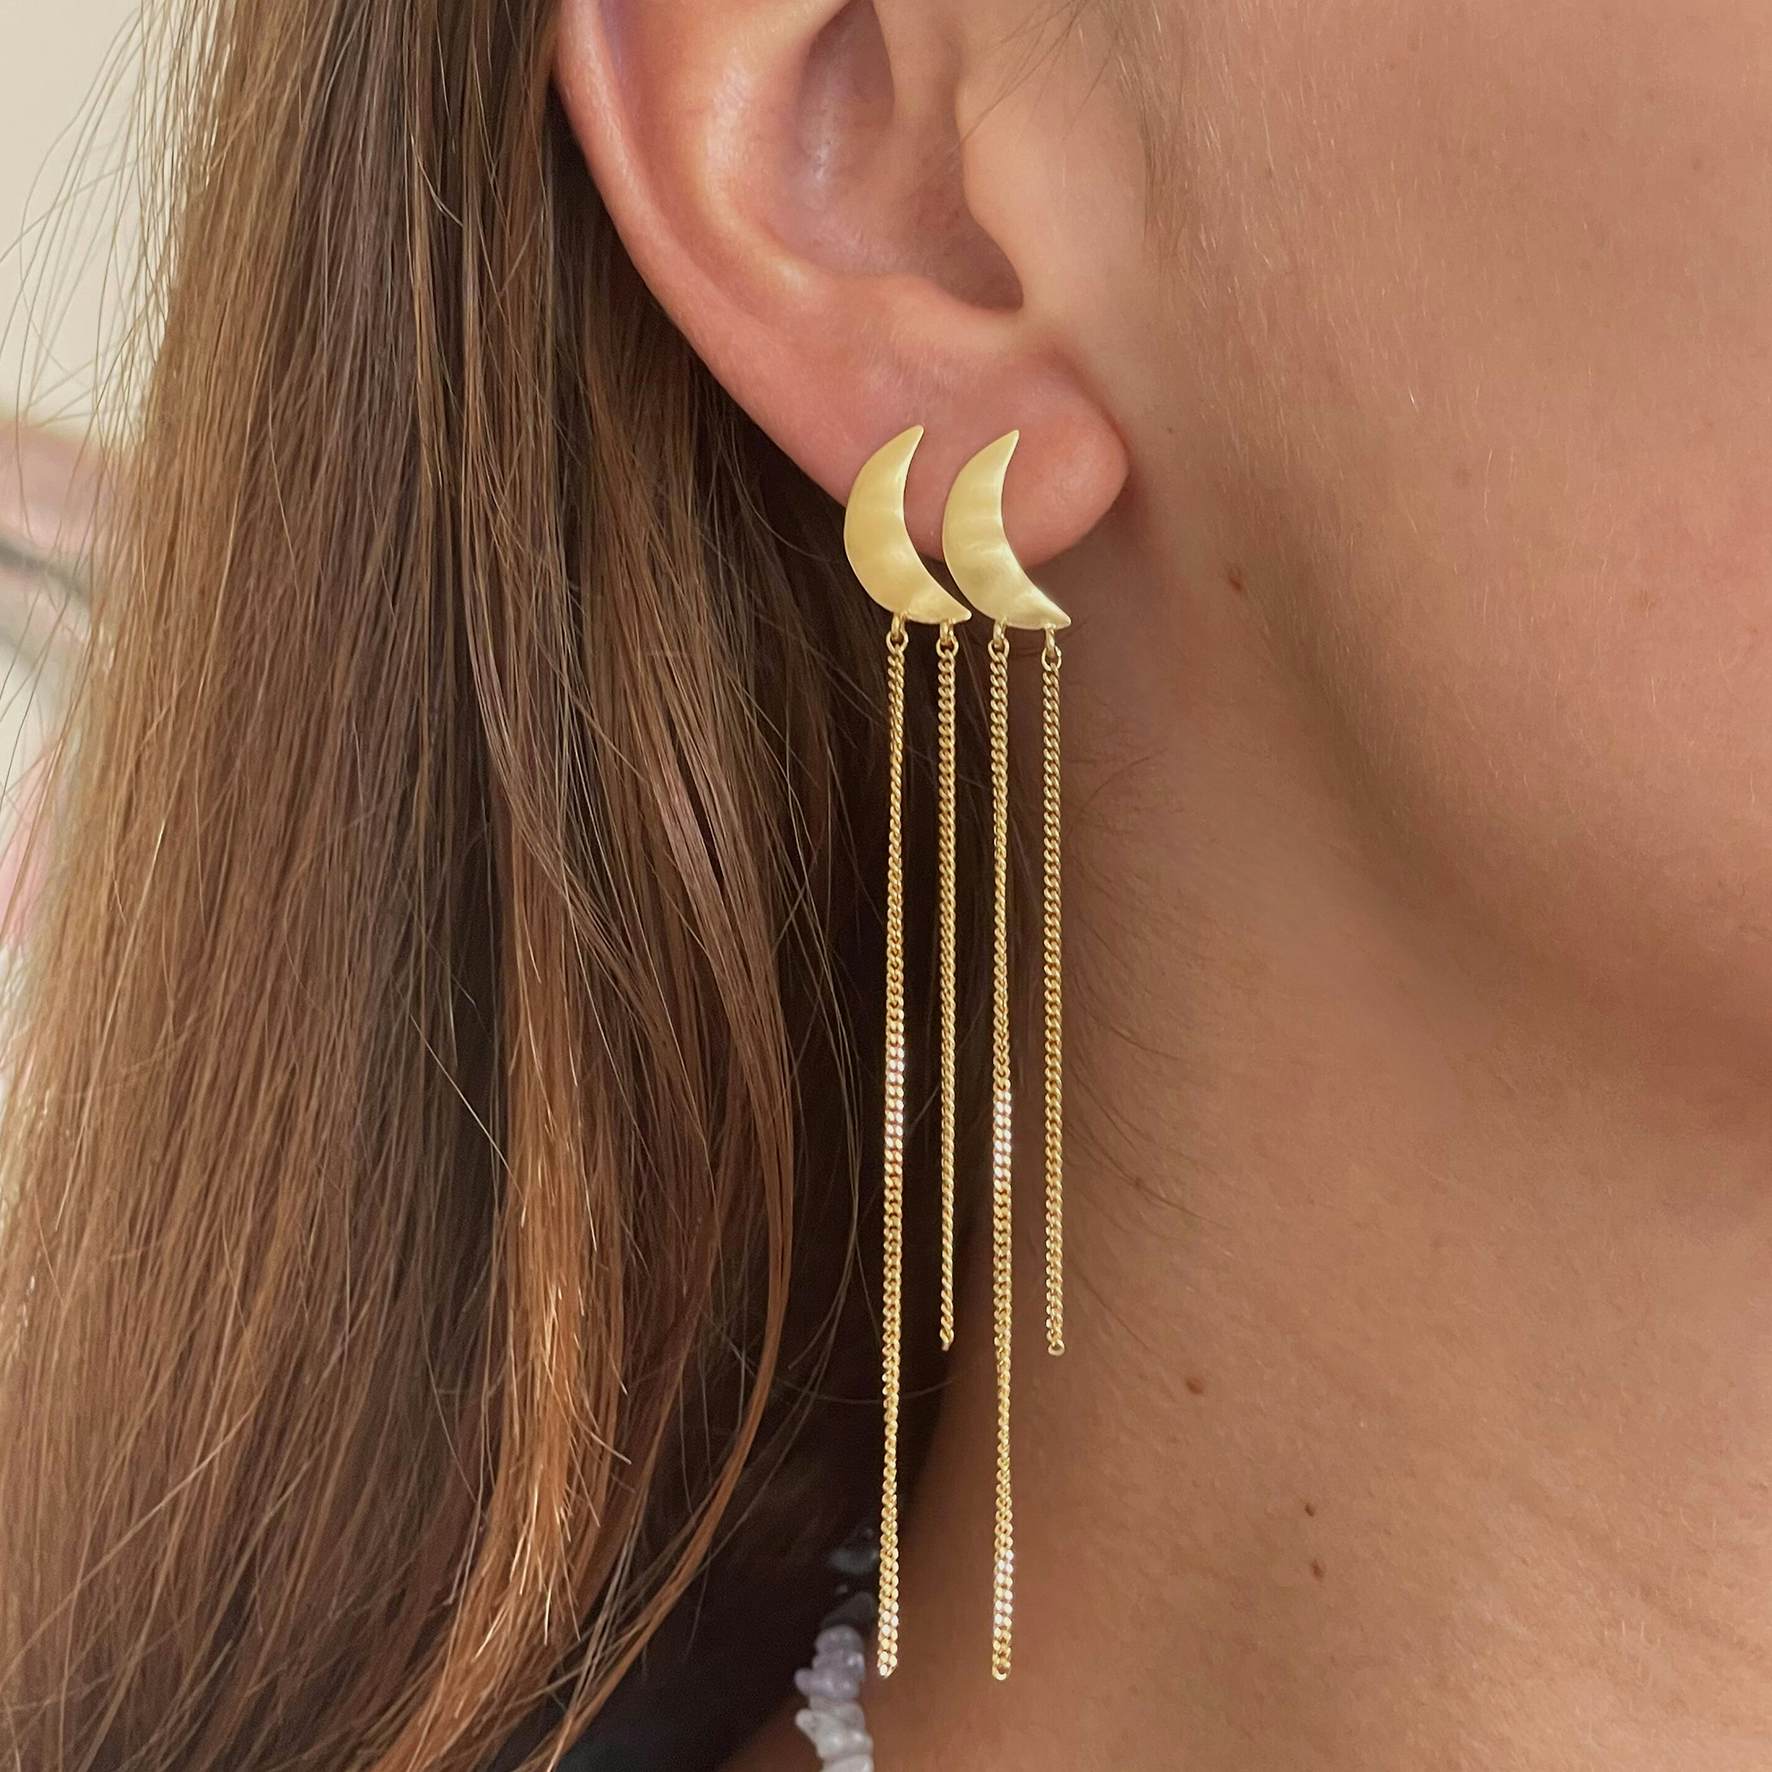 Bella Moon Earring with Long Chains from STINE A Jewelry in Goldplated-Silver Sterling 925